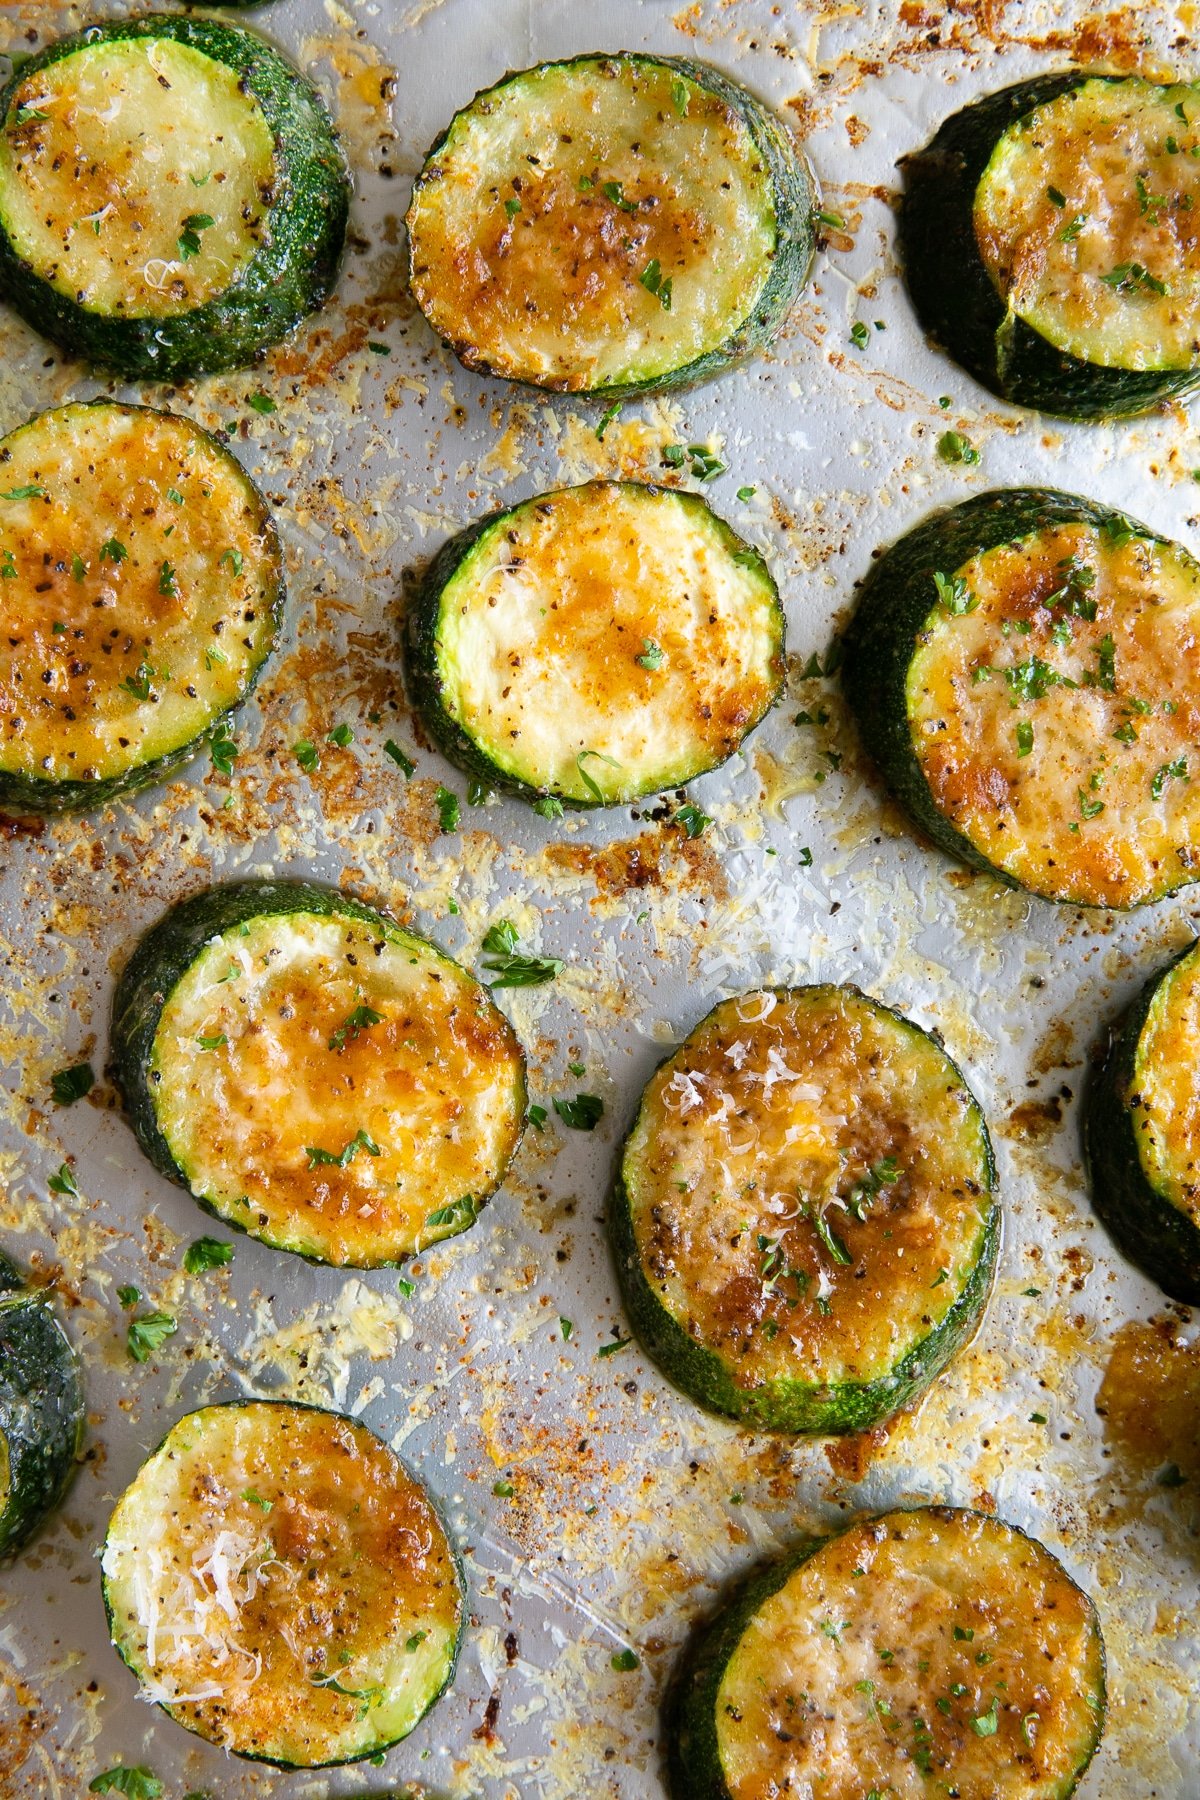 Baking sheet with roasted zucchini slices seasoned with salt, pepper, paprika, and parmesan cheese.